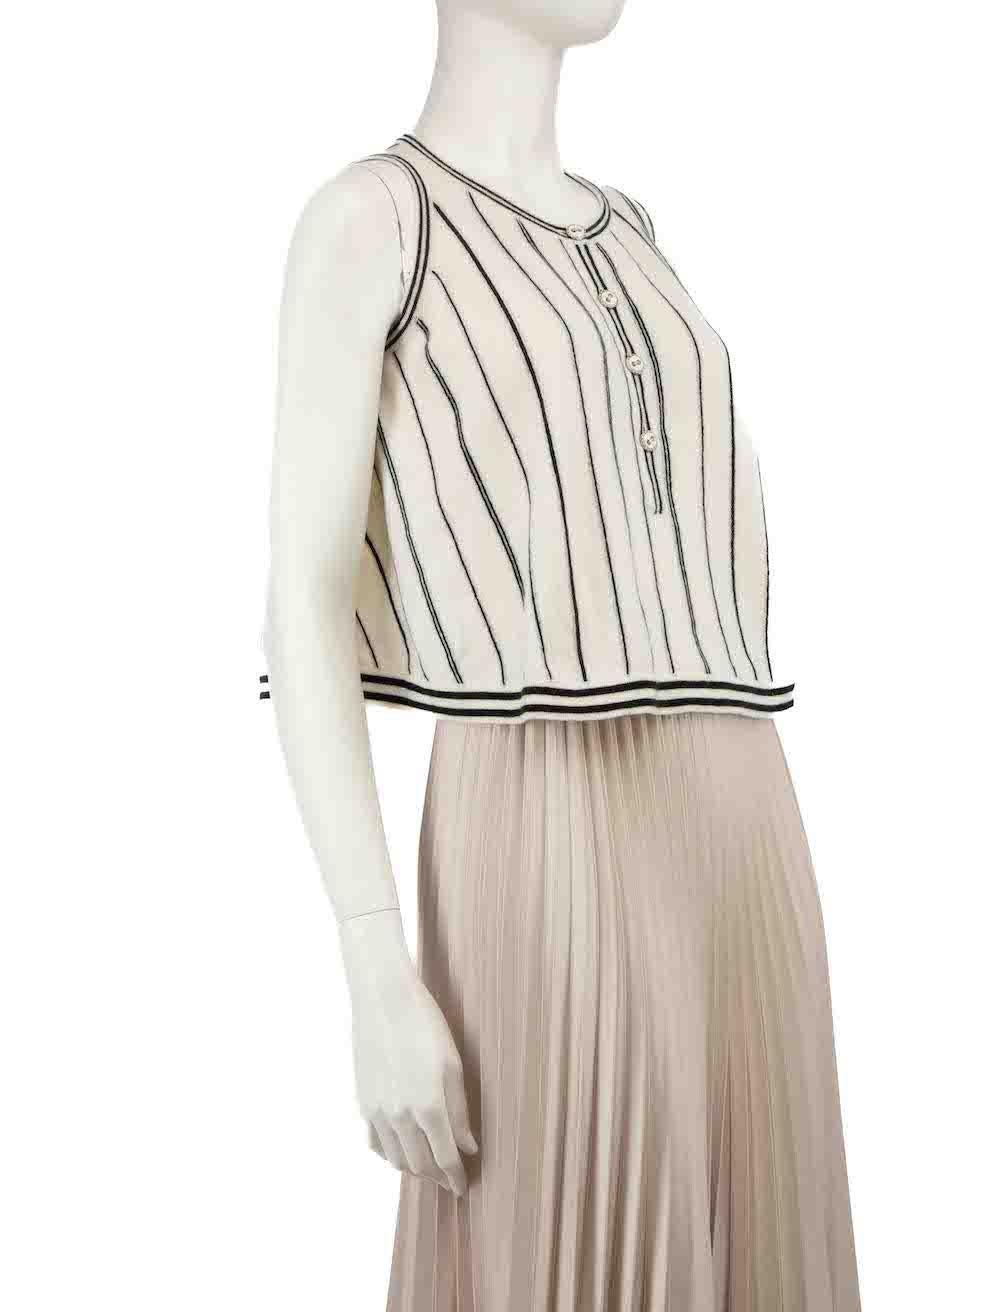 CONDITION is Very good. Hardly any visible wear to top is evident on this used Chanel designer resale item.
 
 
 
 Details
 
 
 Ecru
 
 Cashmere
 
 Sleeveless top
 
 Knitted and stretchy
 
 Striped pattern
 
 Round neckline
 
 Front button up